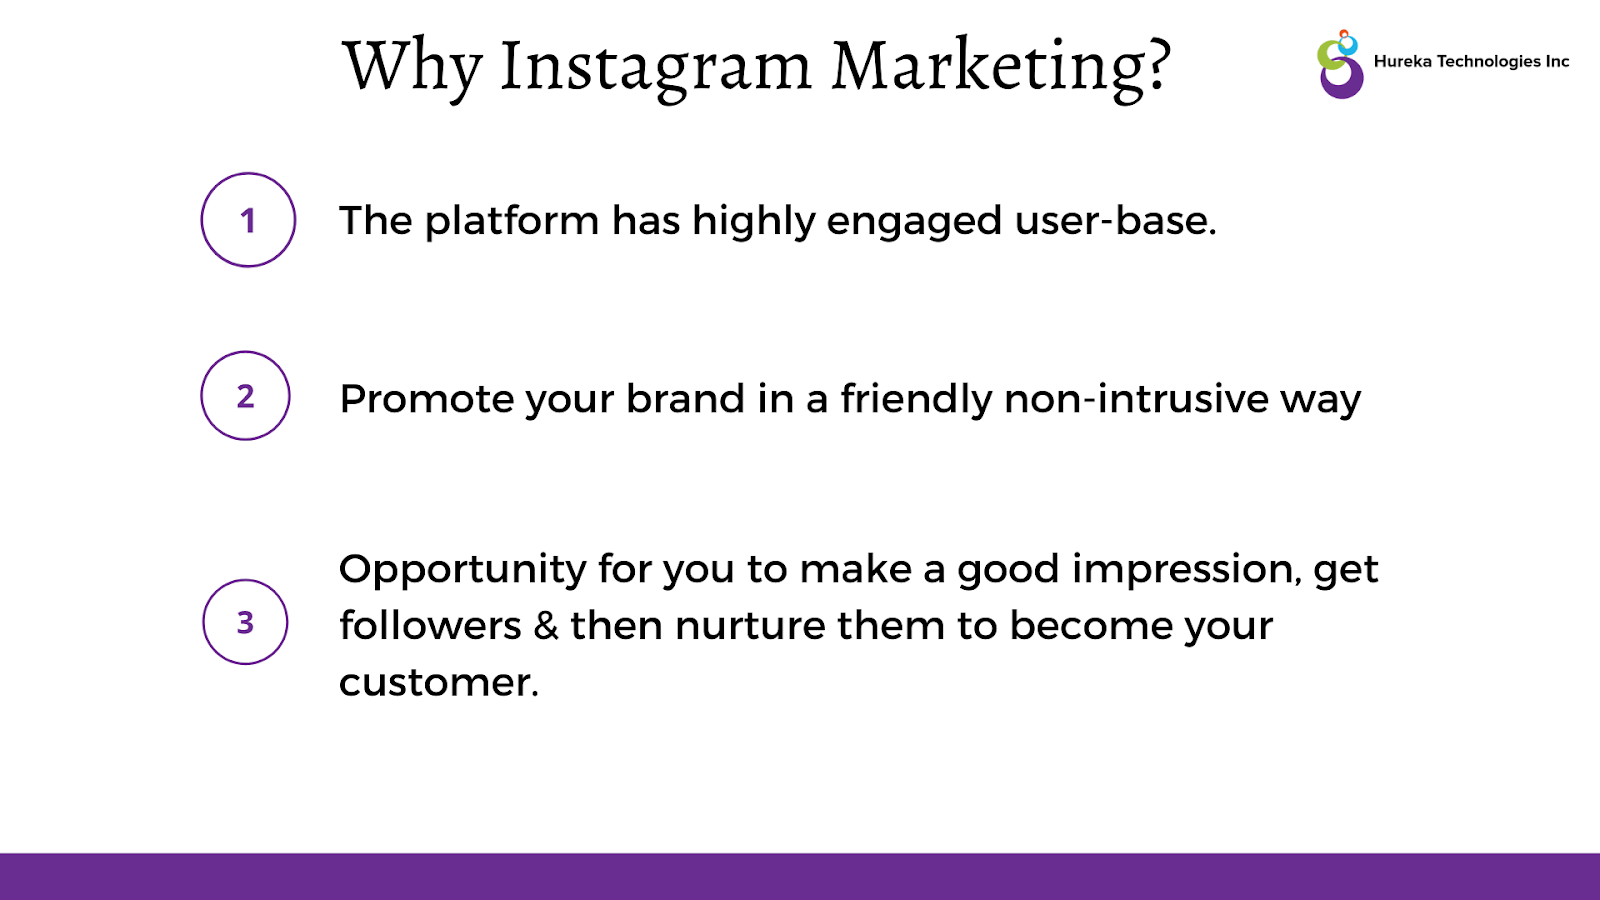 Infographic detailing 3 reasons why Instagram marketing is important